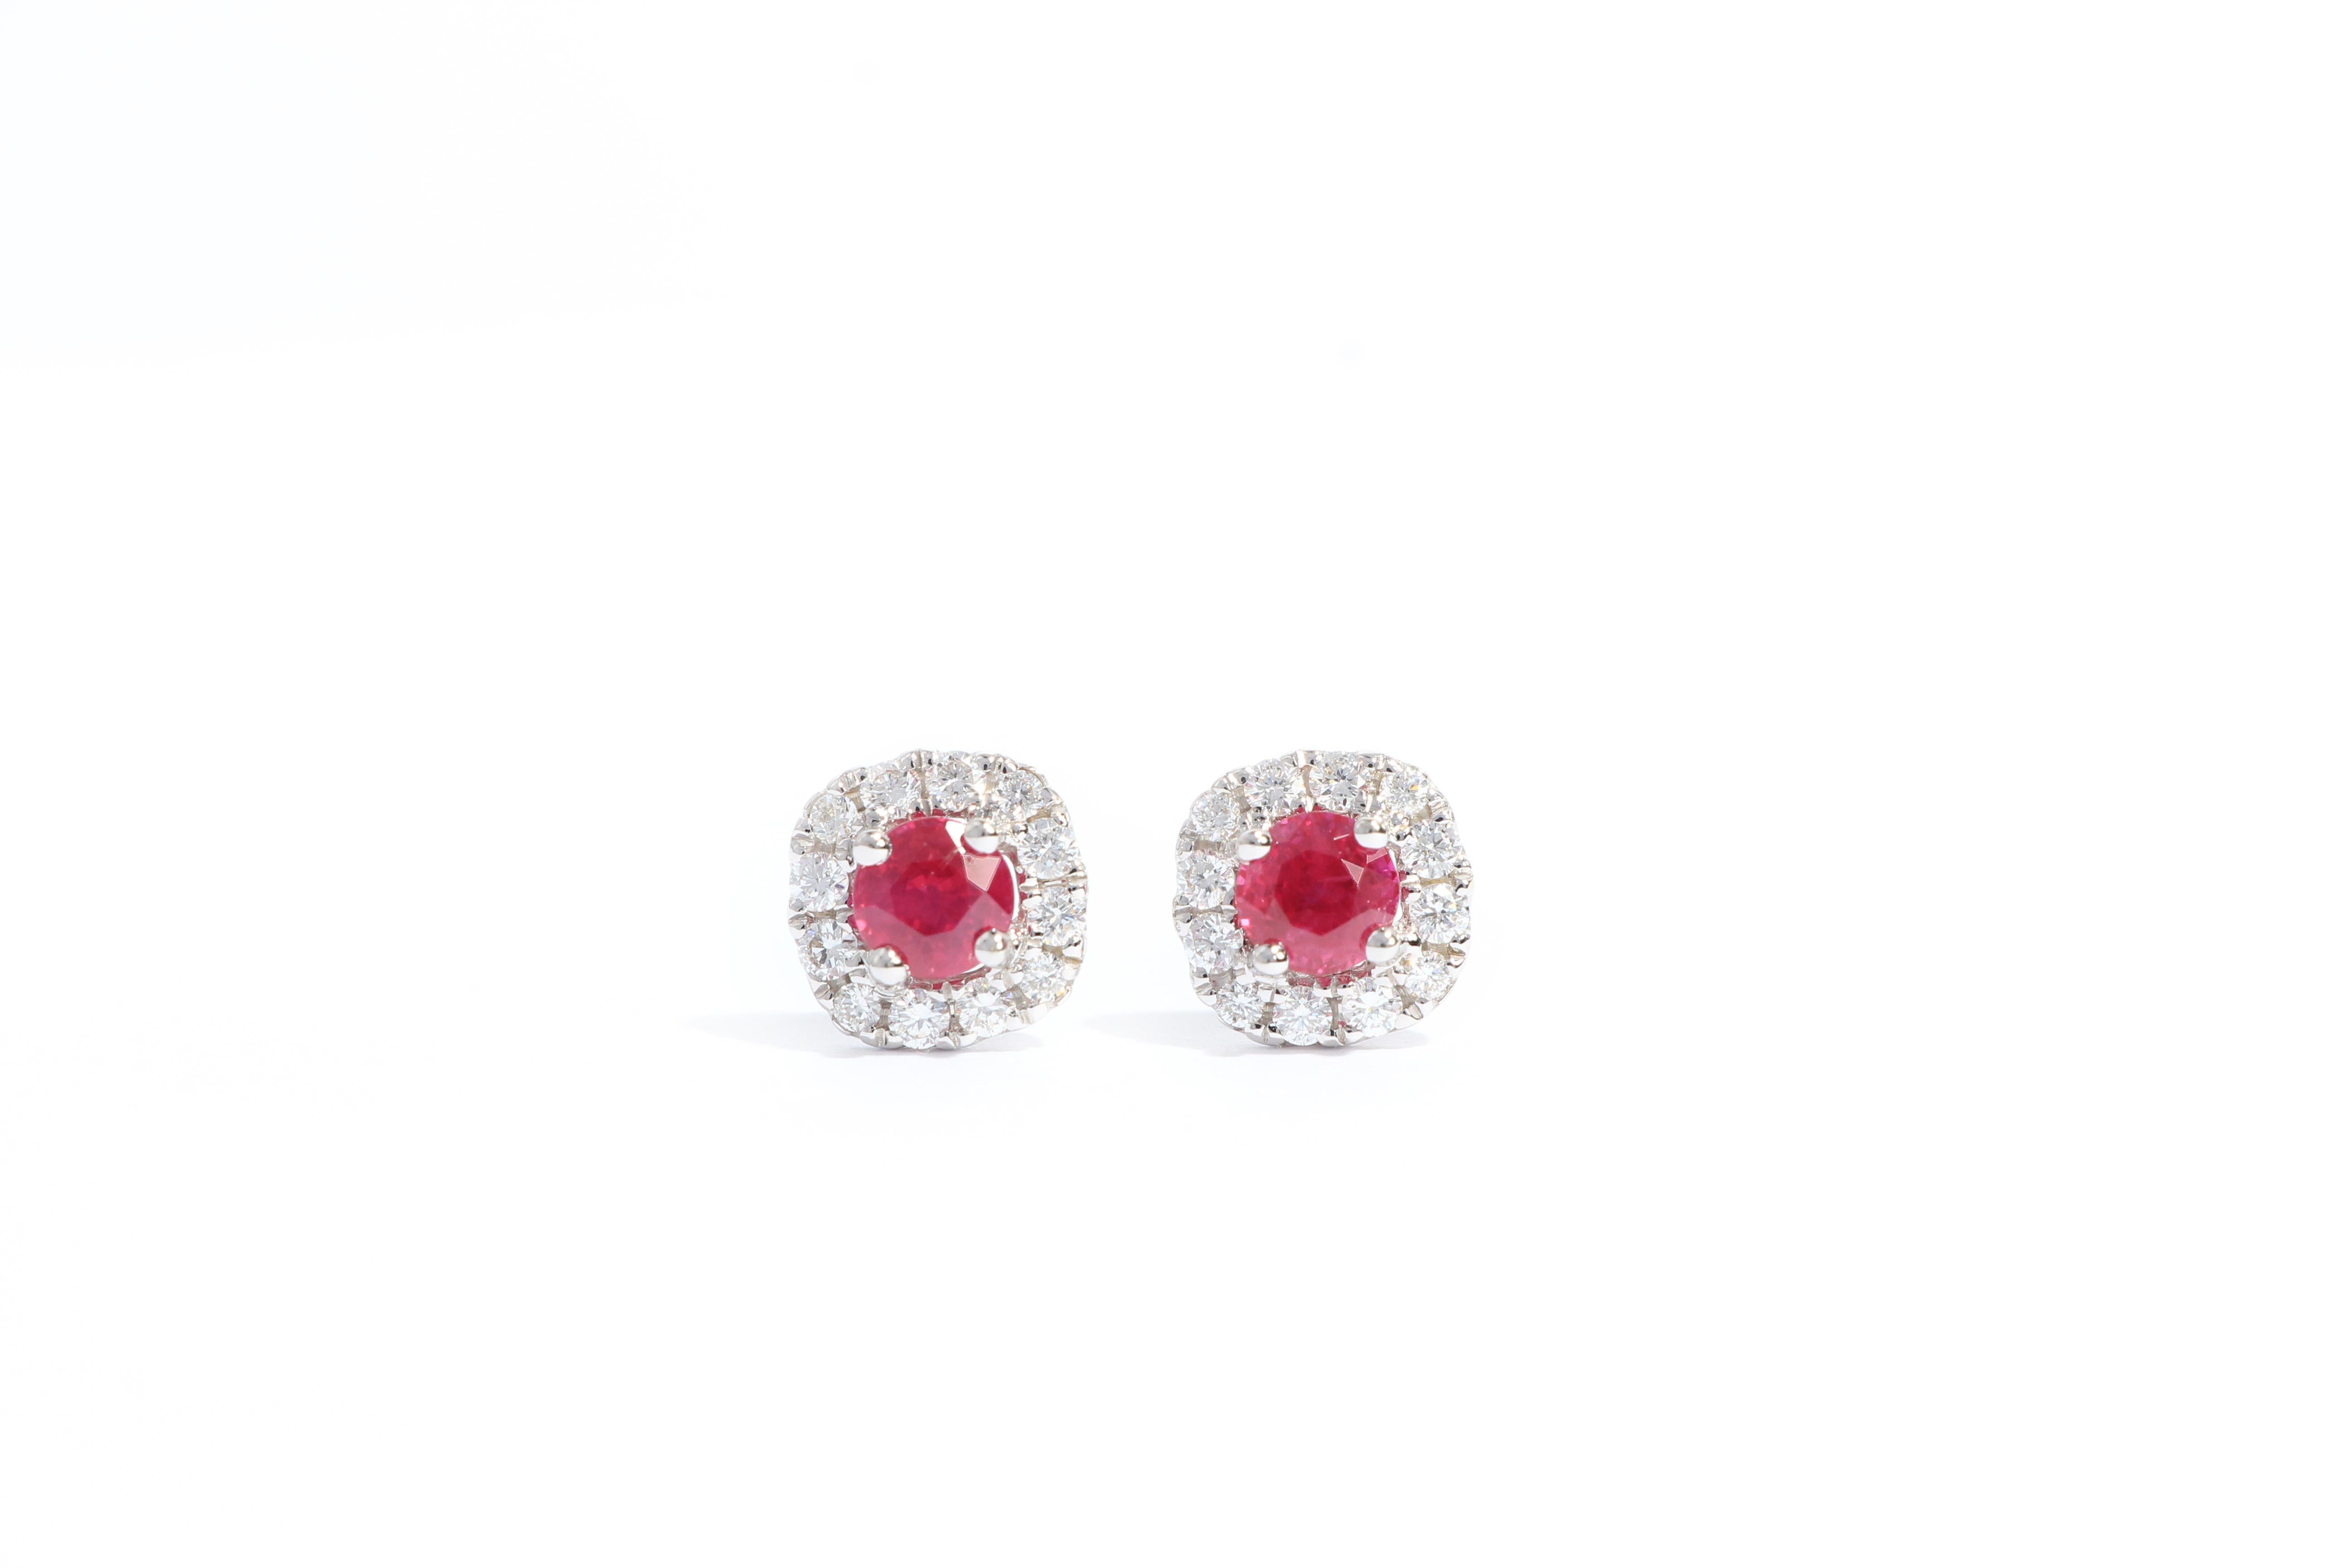 A natural pair of earrings, set with natural ruby weighing 0.47 carats, framed by brilliant-cut diamonds weighing 0.20 carats, mounted in 18 karat white gold.
O’Che 1867 is renowned for its high jewellery collections with fabulous designs. Our